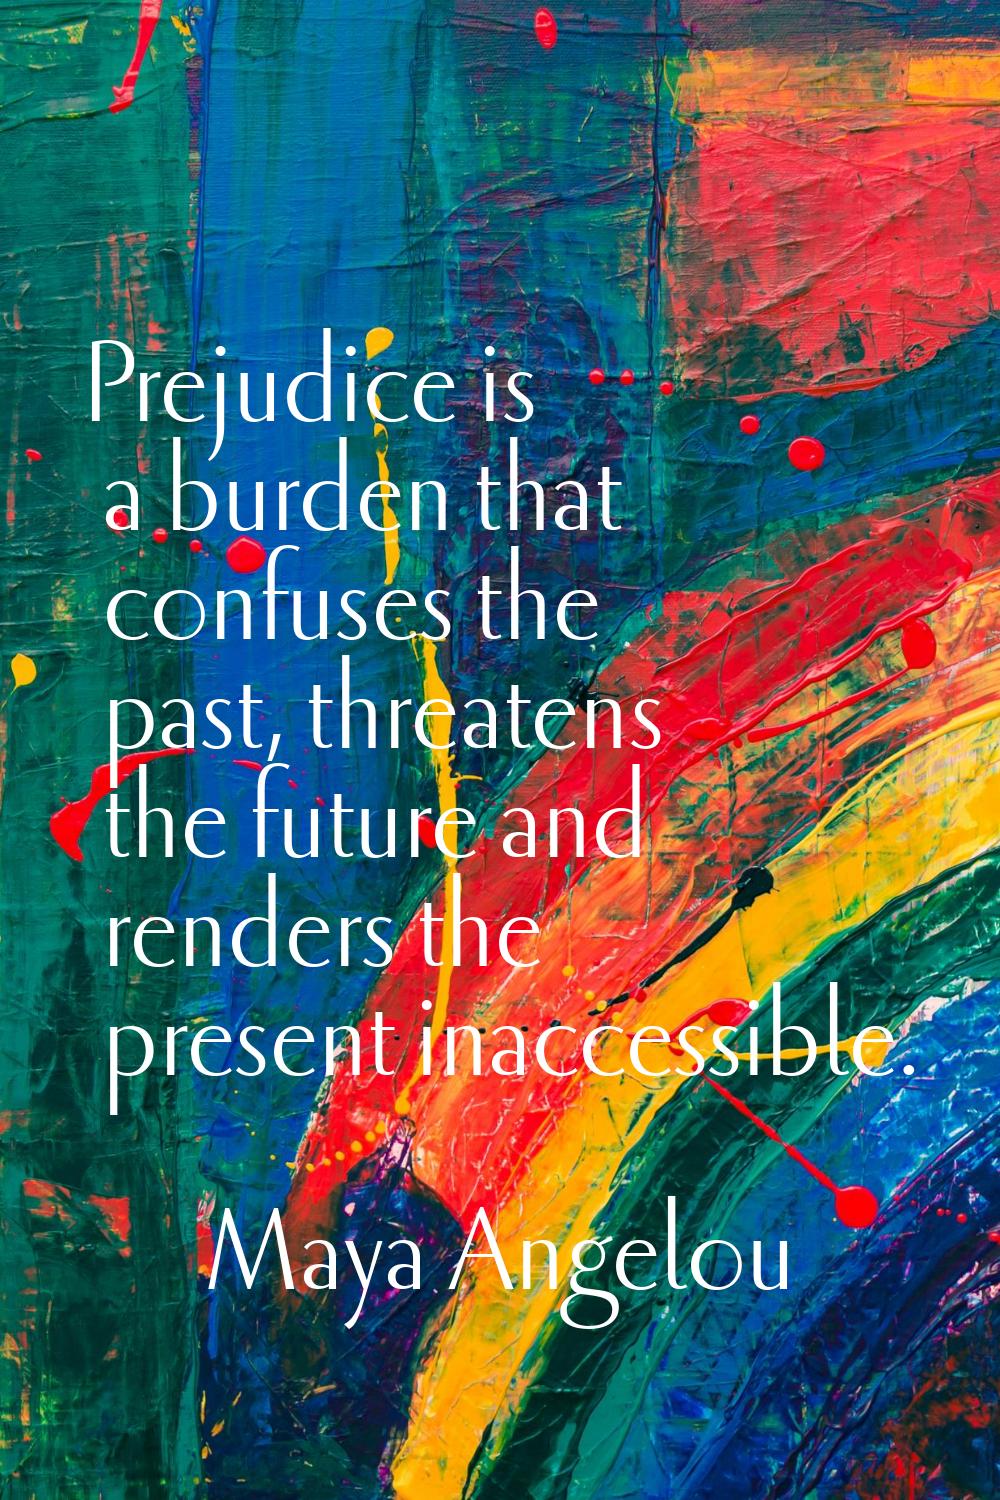 Prejudice is a burden that confuses the past, threatens the future and renders the present inaccess